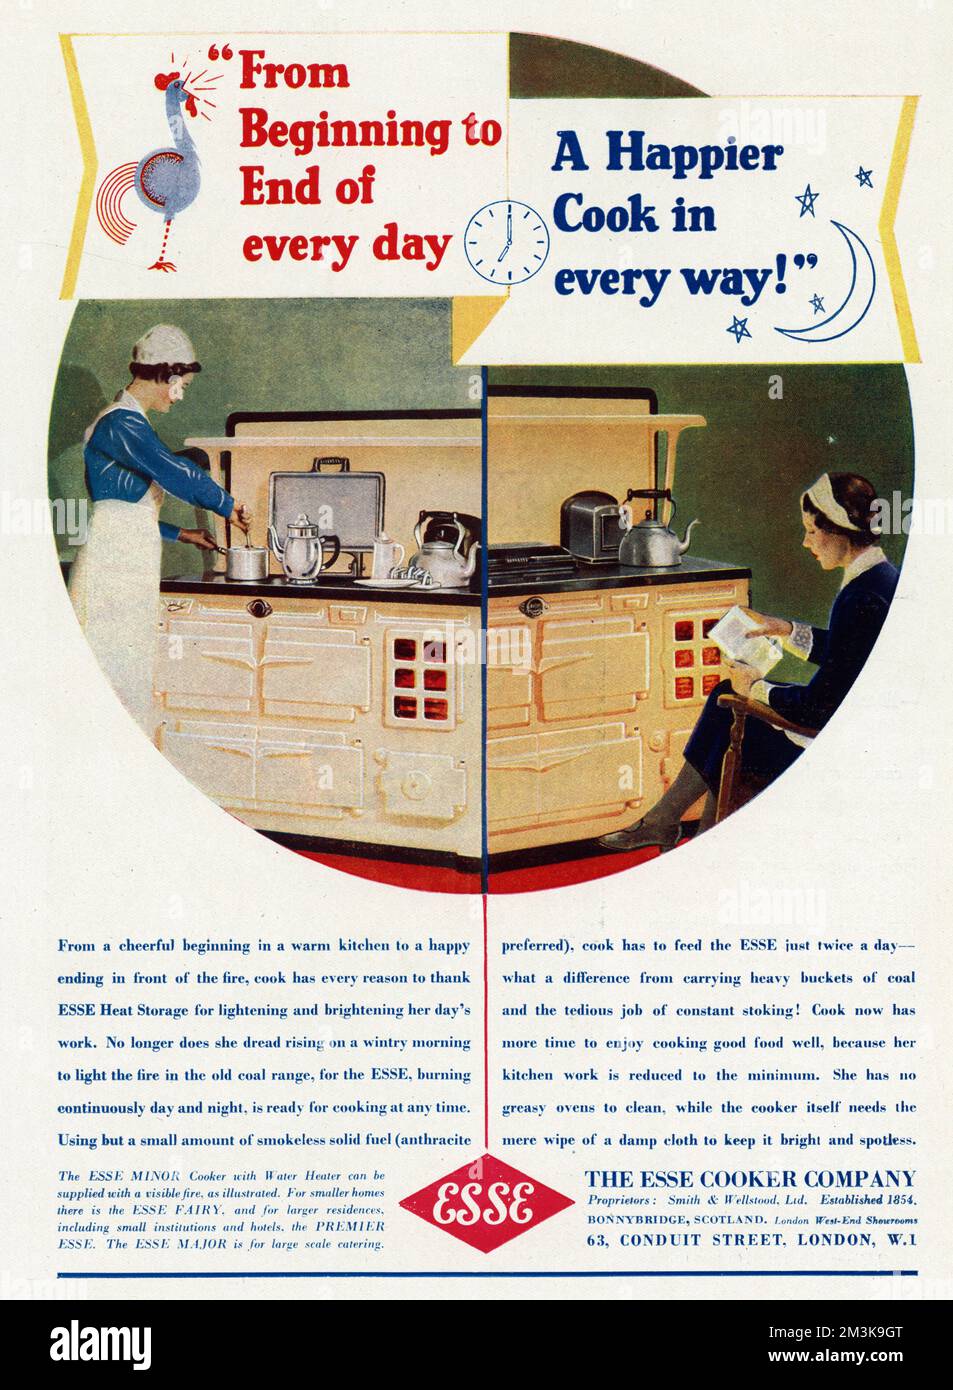 'From beginning to end of every day, a happier cook in every way!'    From a cheerful beginning in a warm kitchen to a happy ending in front of the fire, every reason to thank Esse heat storage for lightening and brightening her day's work.     Date: 1938 Stock Photo